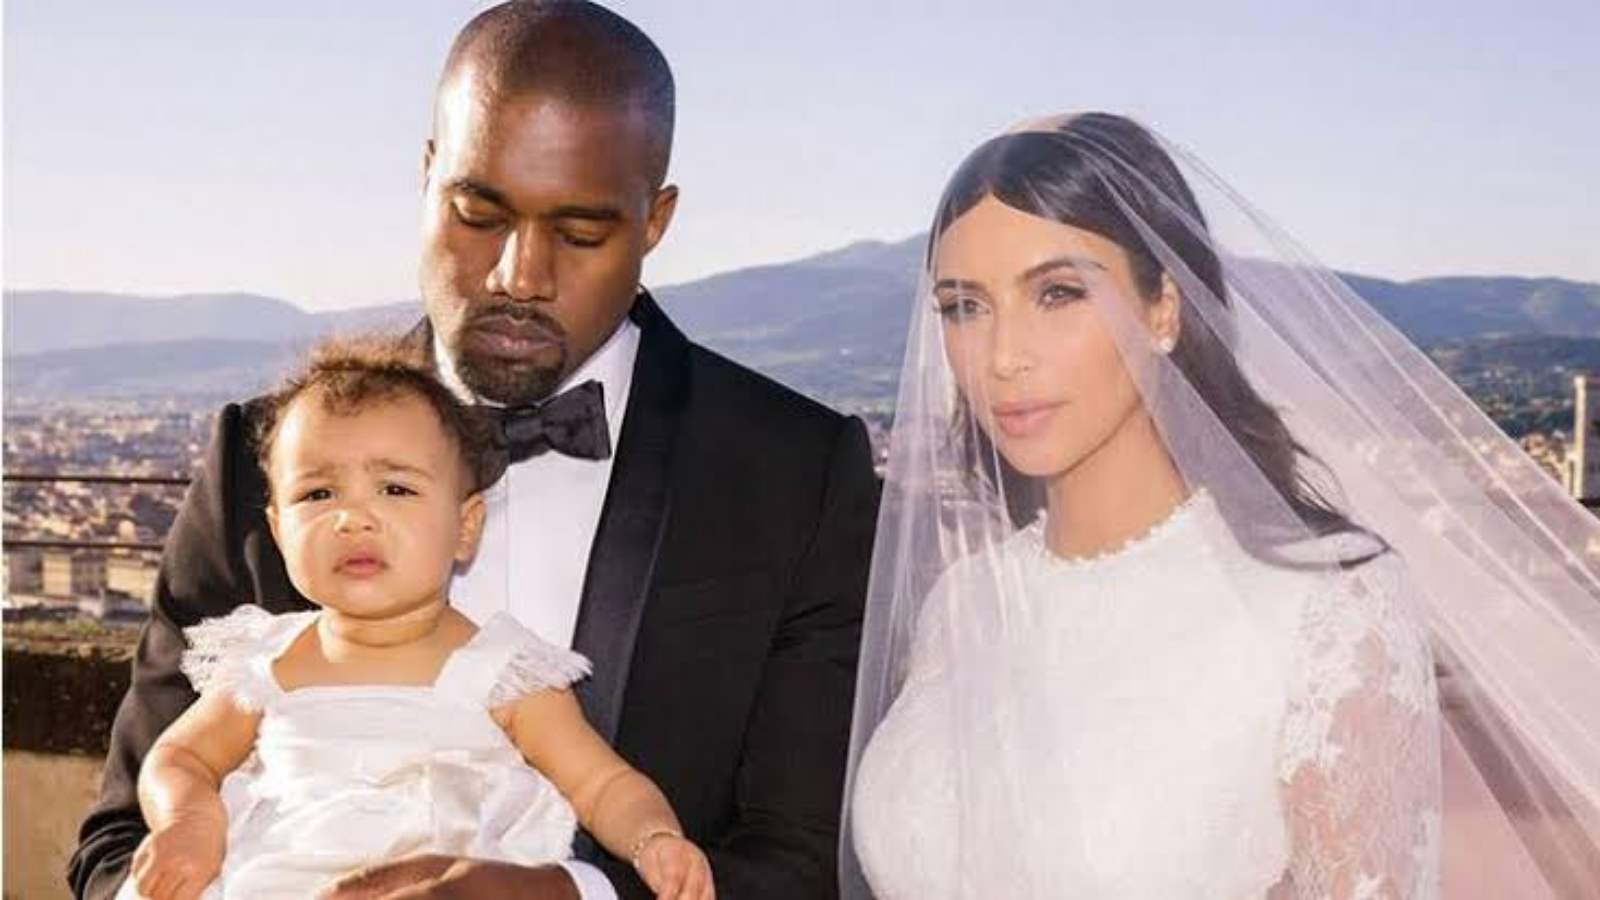 Kanye West and Kim Kardashian with North West during their wedding day